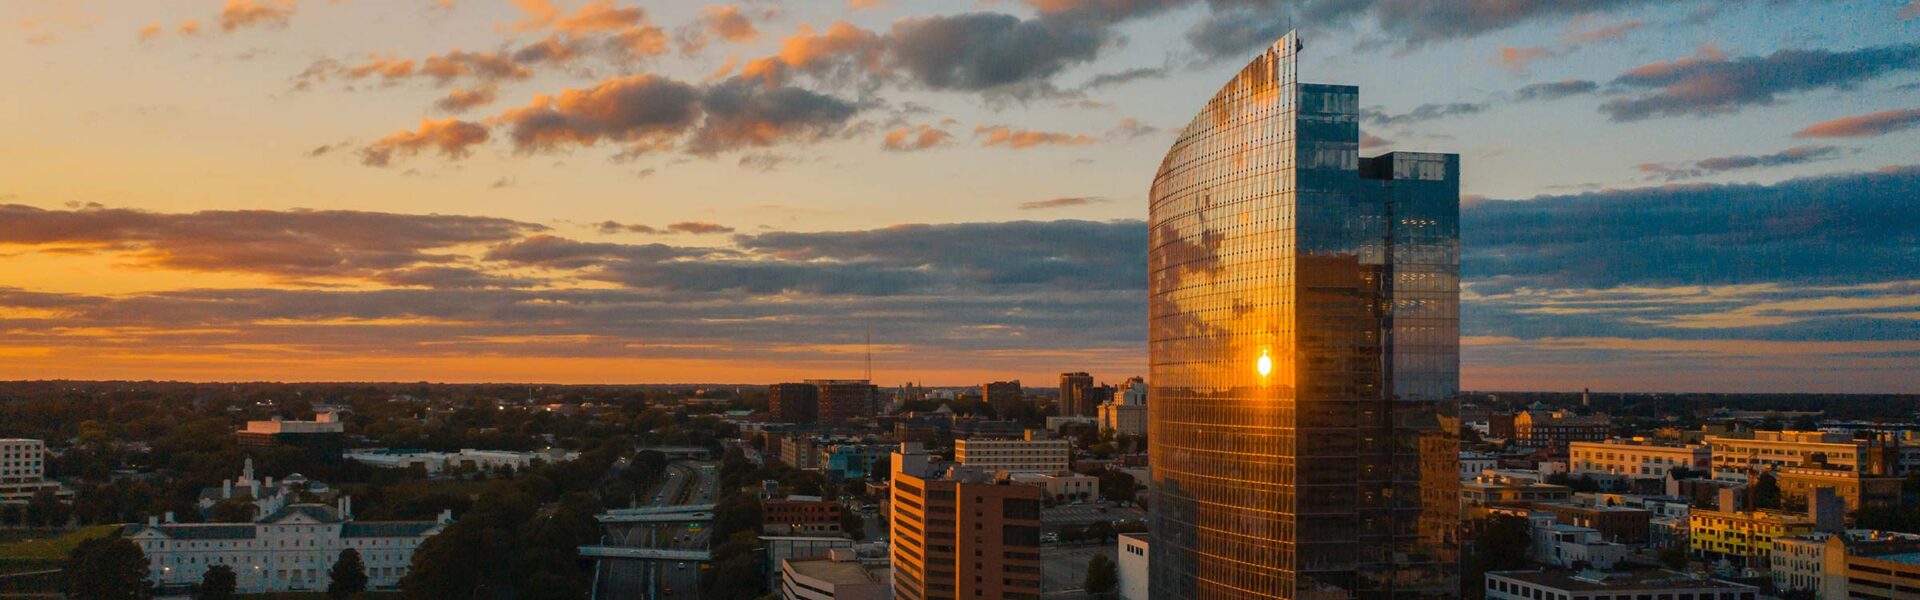 Overhead view of the city of Richmond, VA with the sunset reflecting off of a glass skyscraper.